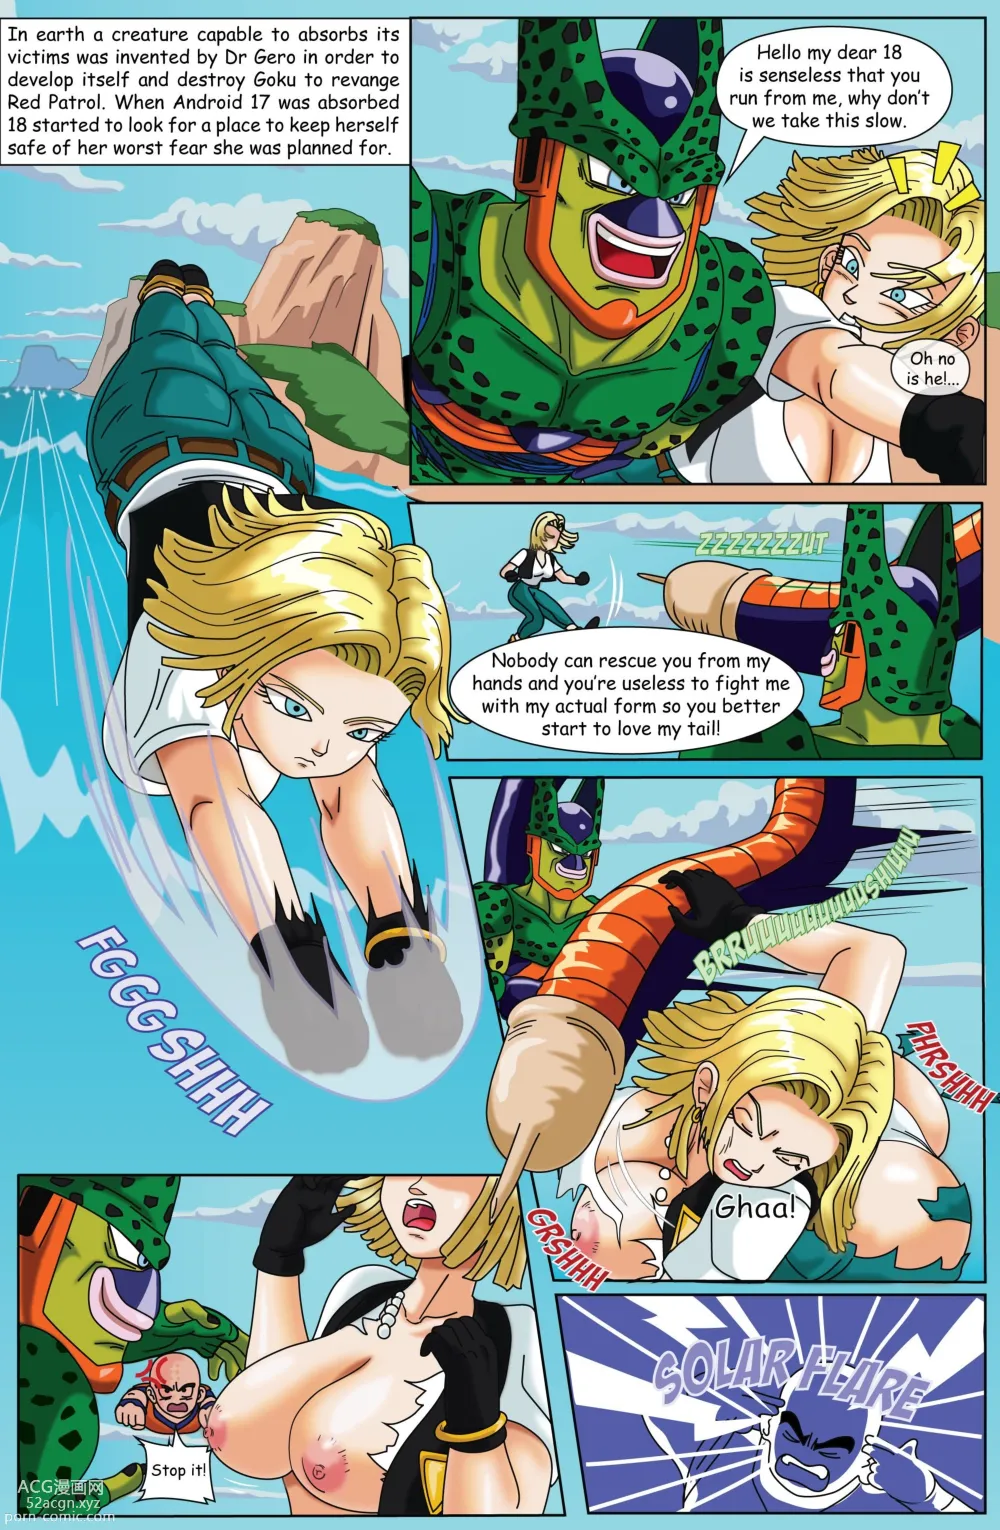 Android 18 Goes Inside Cell - Chapter 1 (Dragon Ball Z) - Western Porn  Comics Western Adult Comix (Page 3)